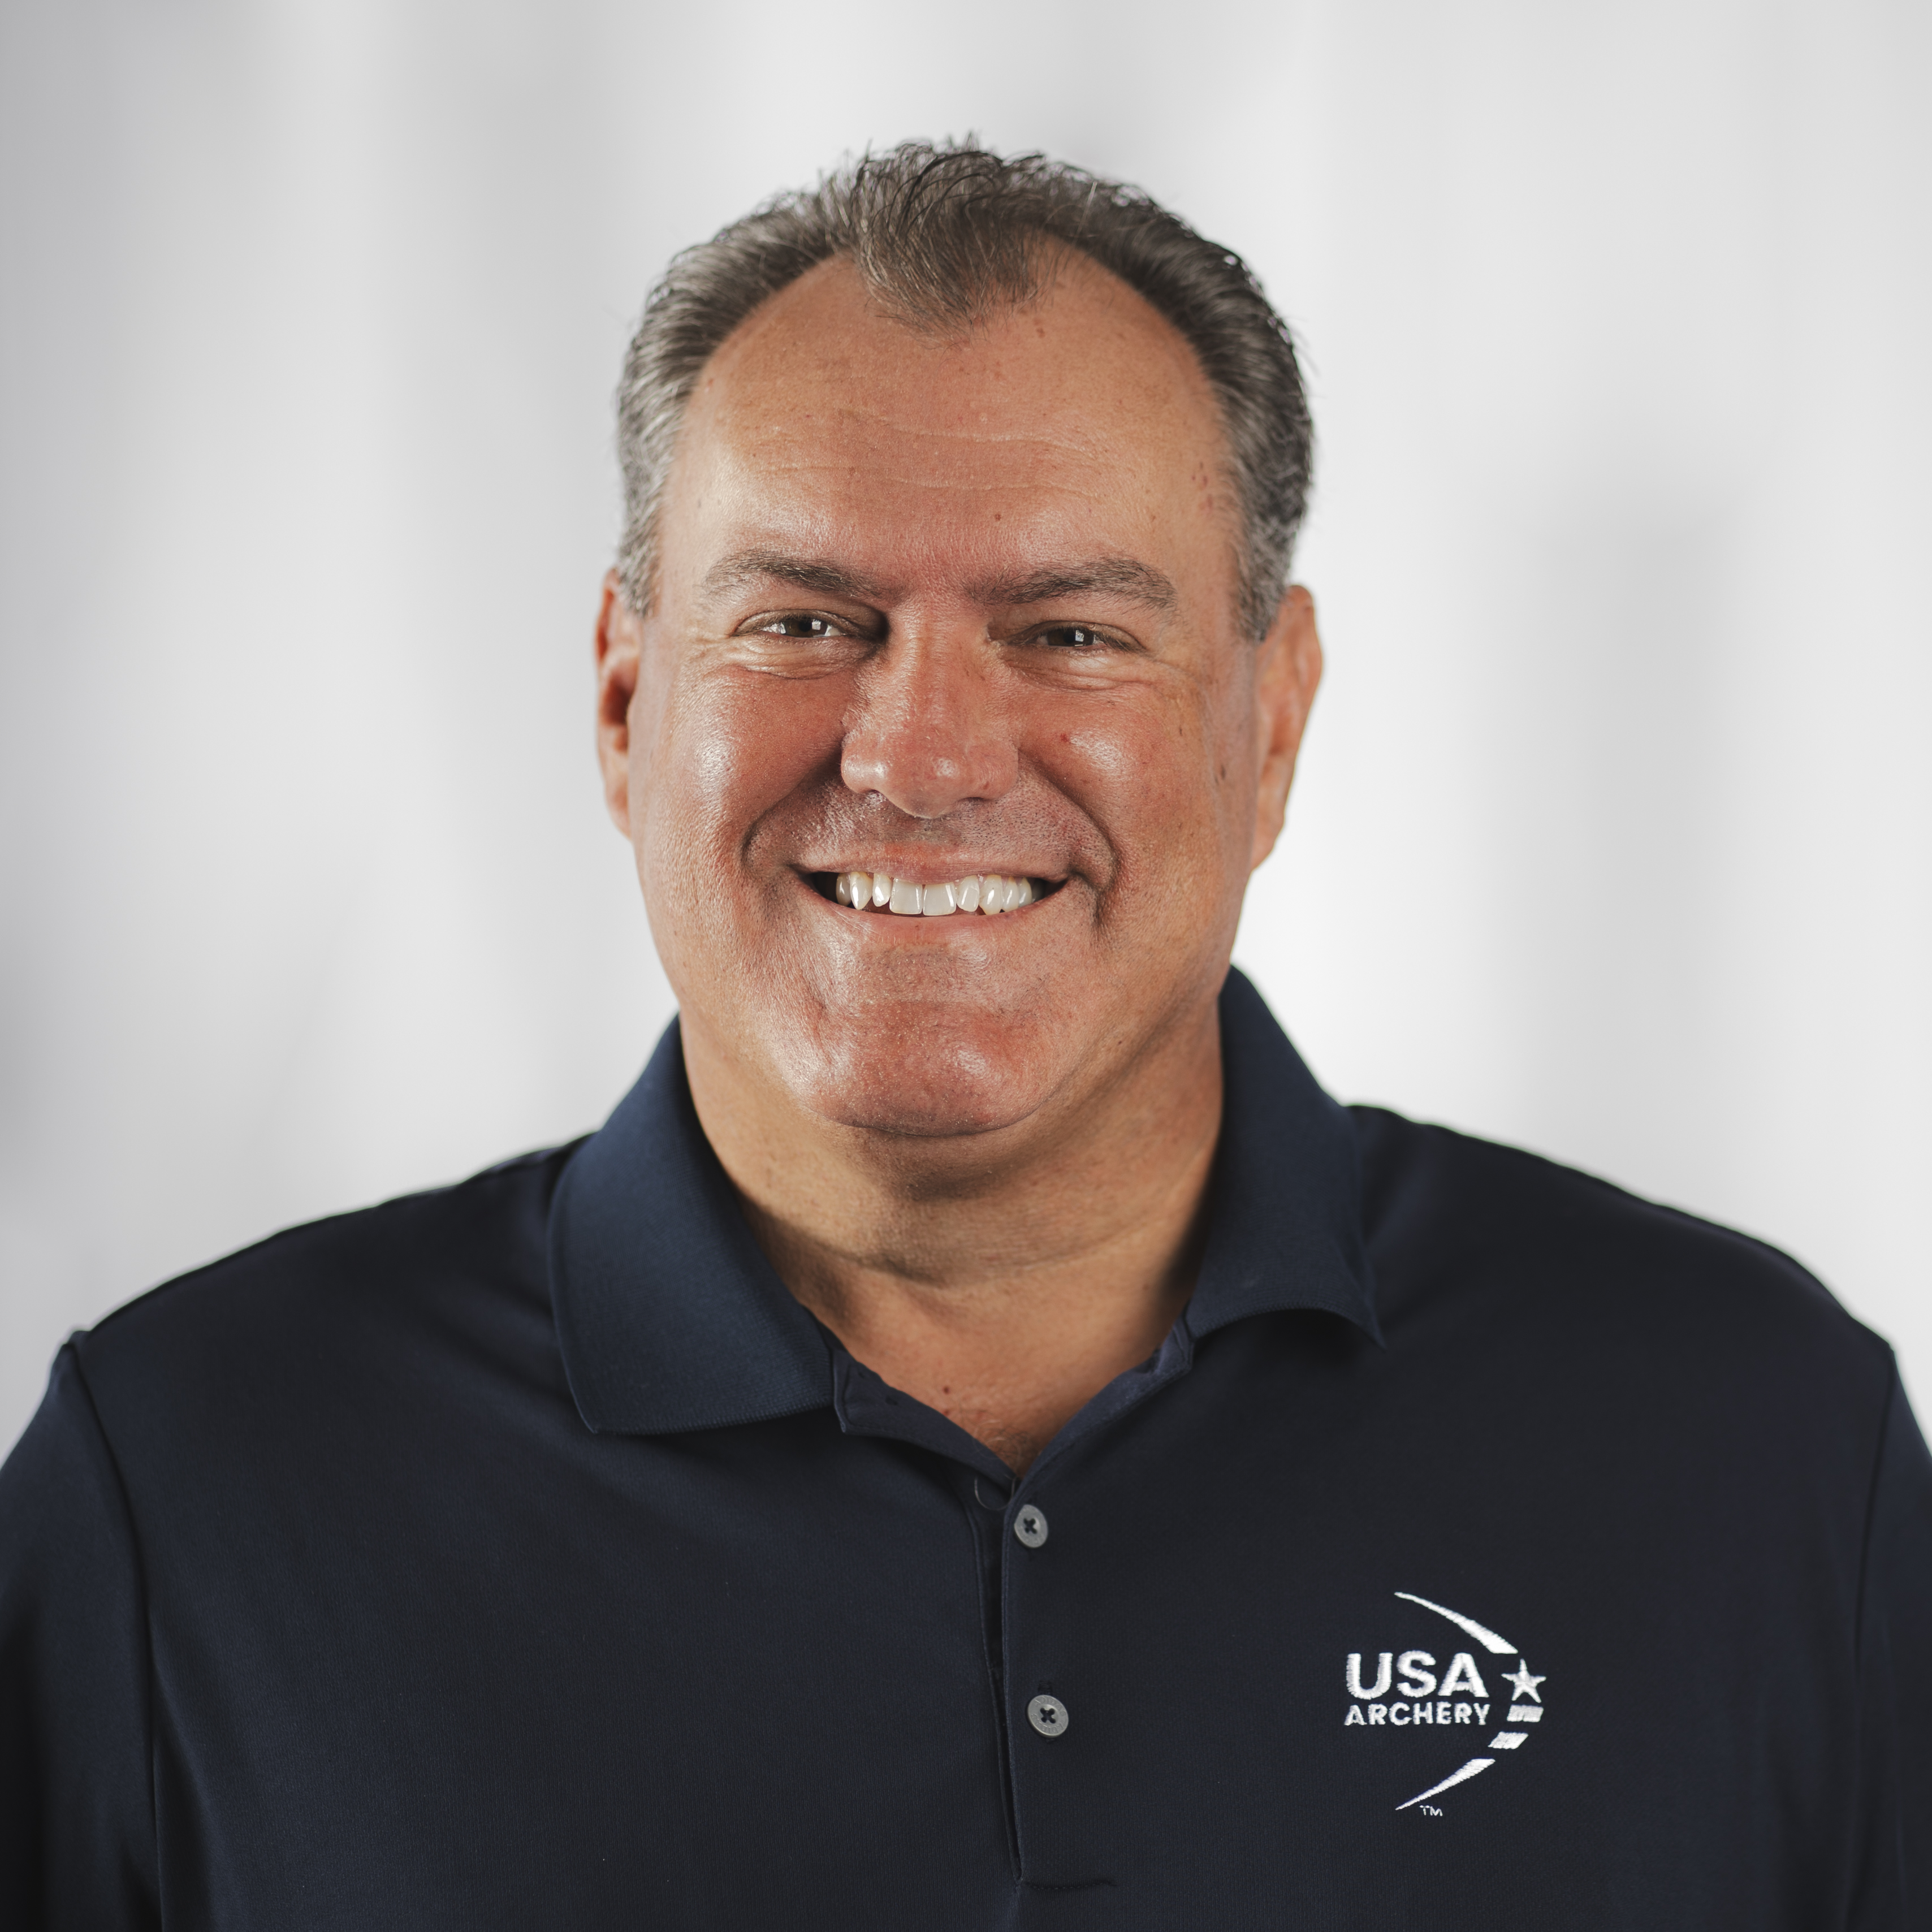 Rod Menzer, CEO of USA Archery since 2018, had a 25-year career in sales and sales leadership in the food and beverage industry in addition to serving on the Board of Directors for USA Archery. 